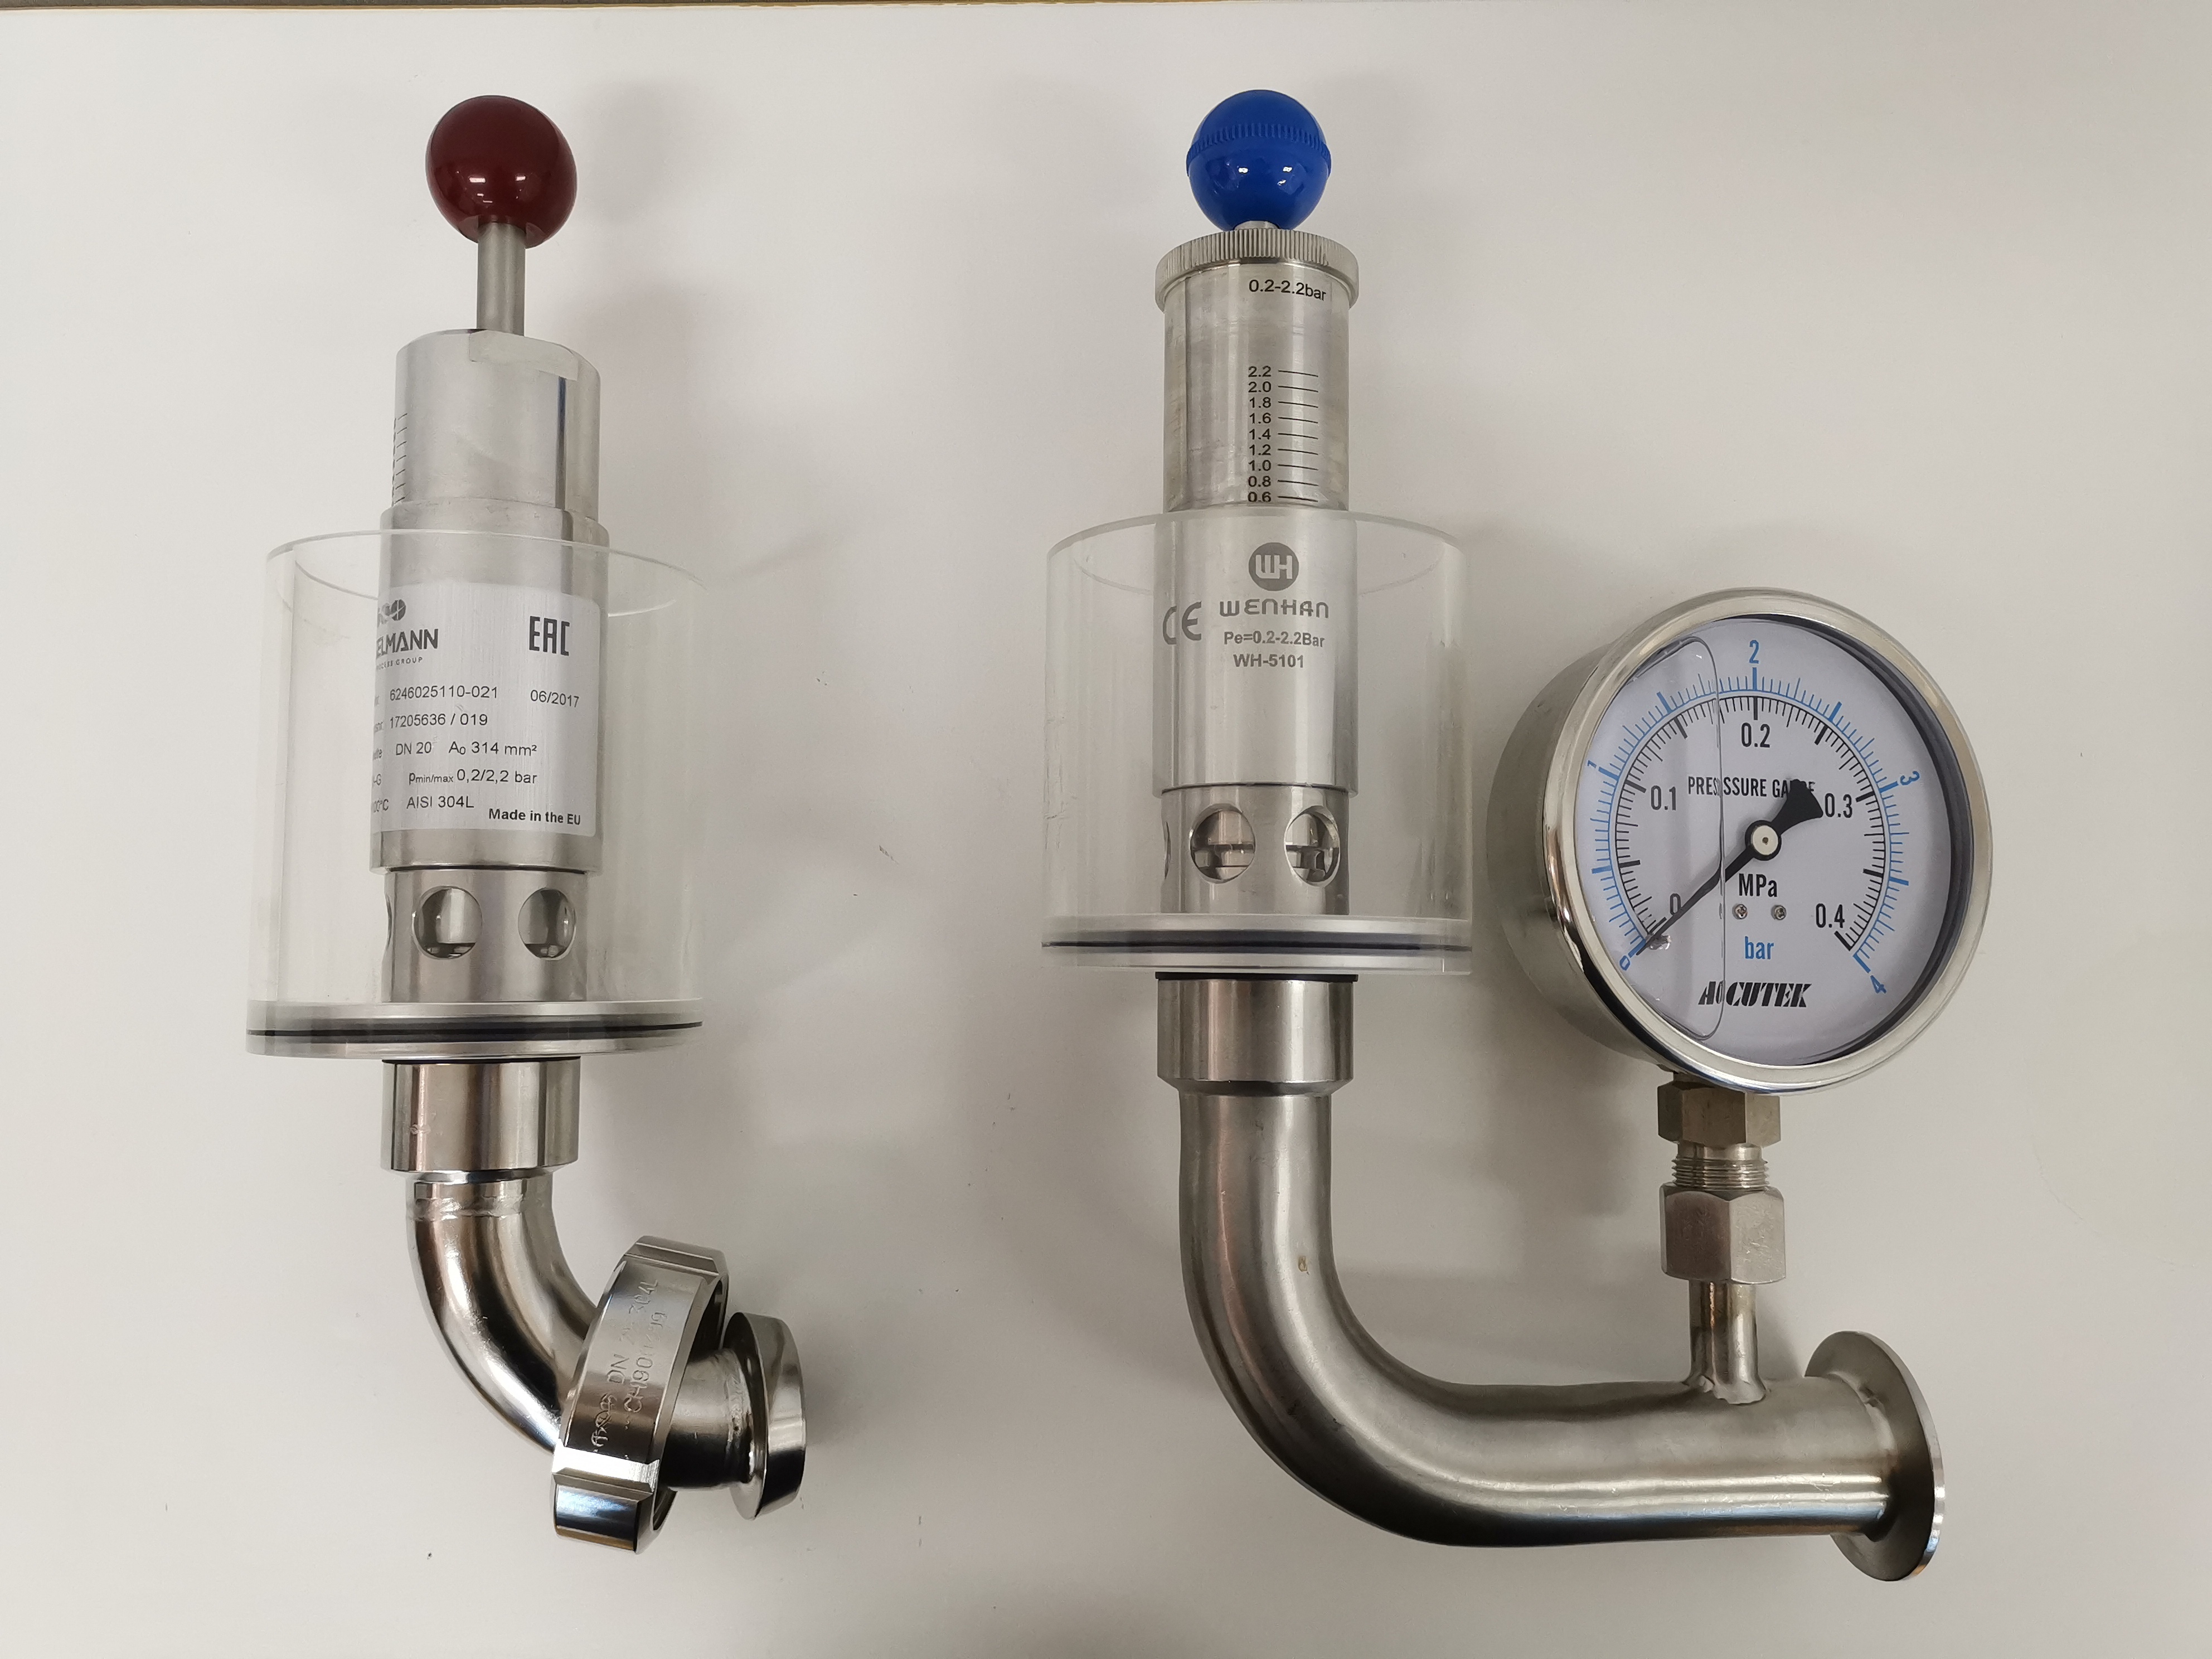 What is the difference between a bunging valve and a PVRV on beer fermenter?